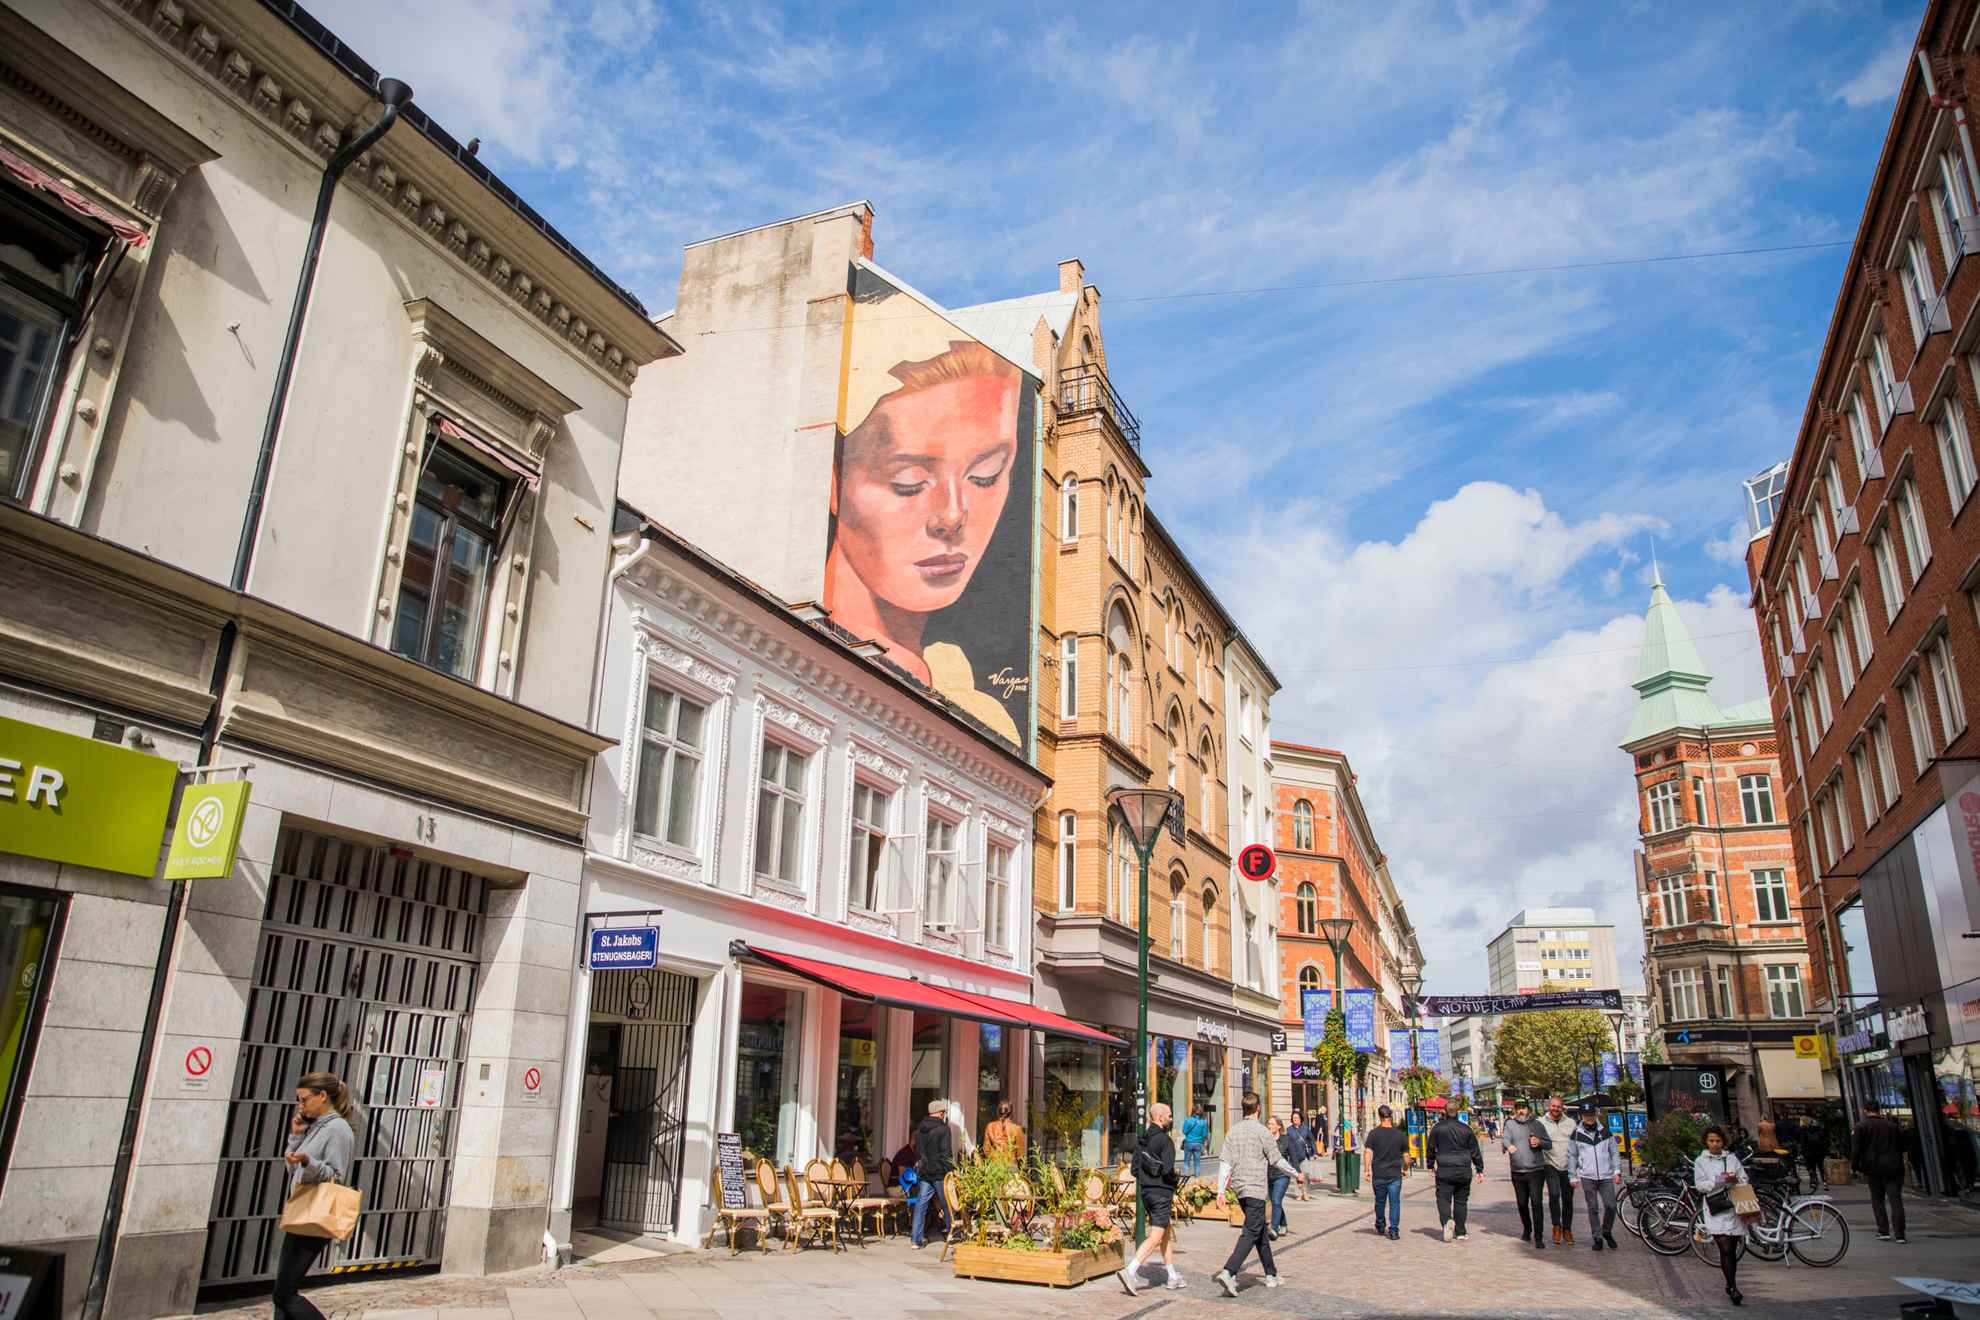 A pedestrian street with stone houses on each side. People strolling down the street. A mural painting on a house showing a the face of a woman.